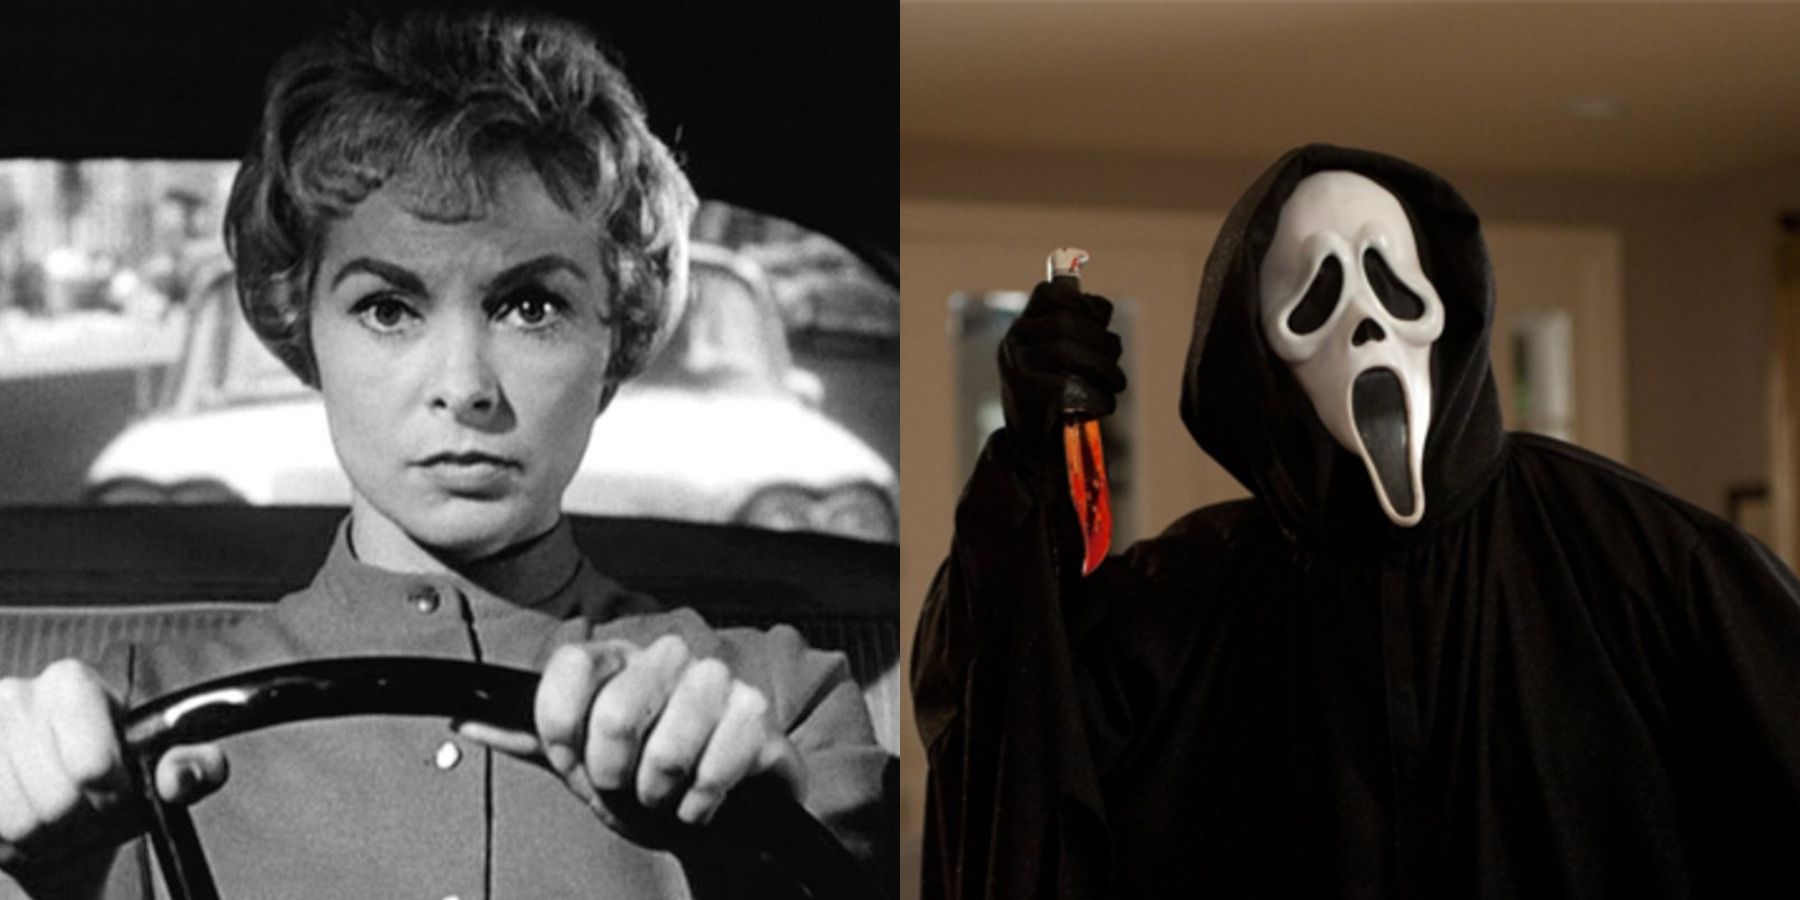 Horror films feature split image Psycho and Scream